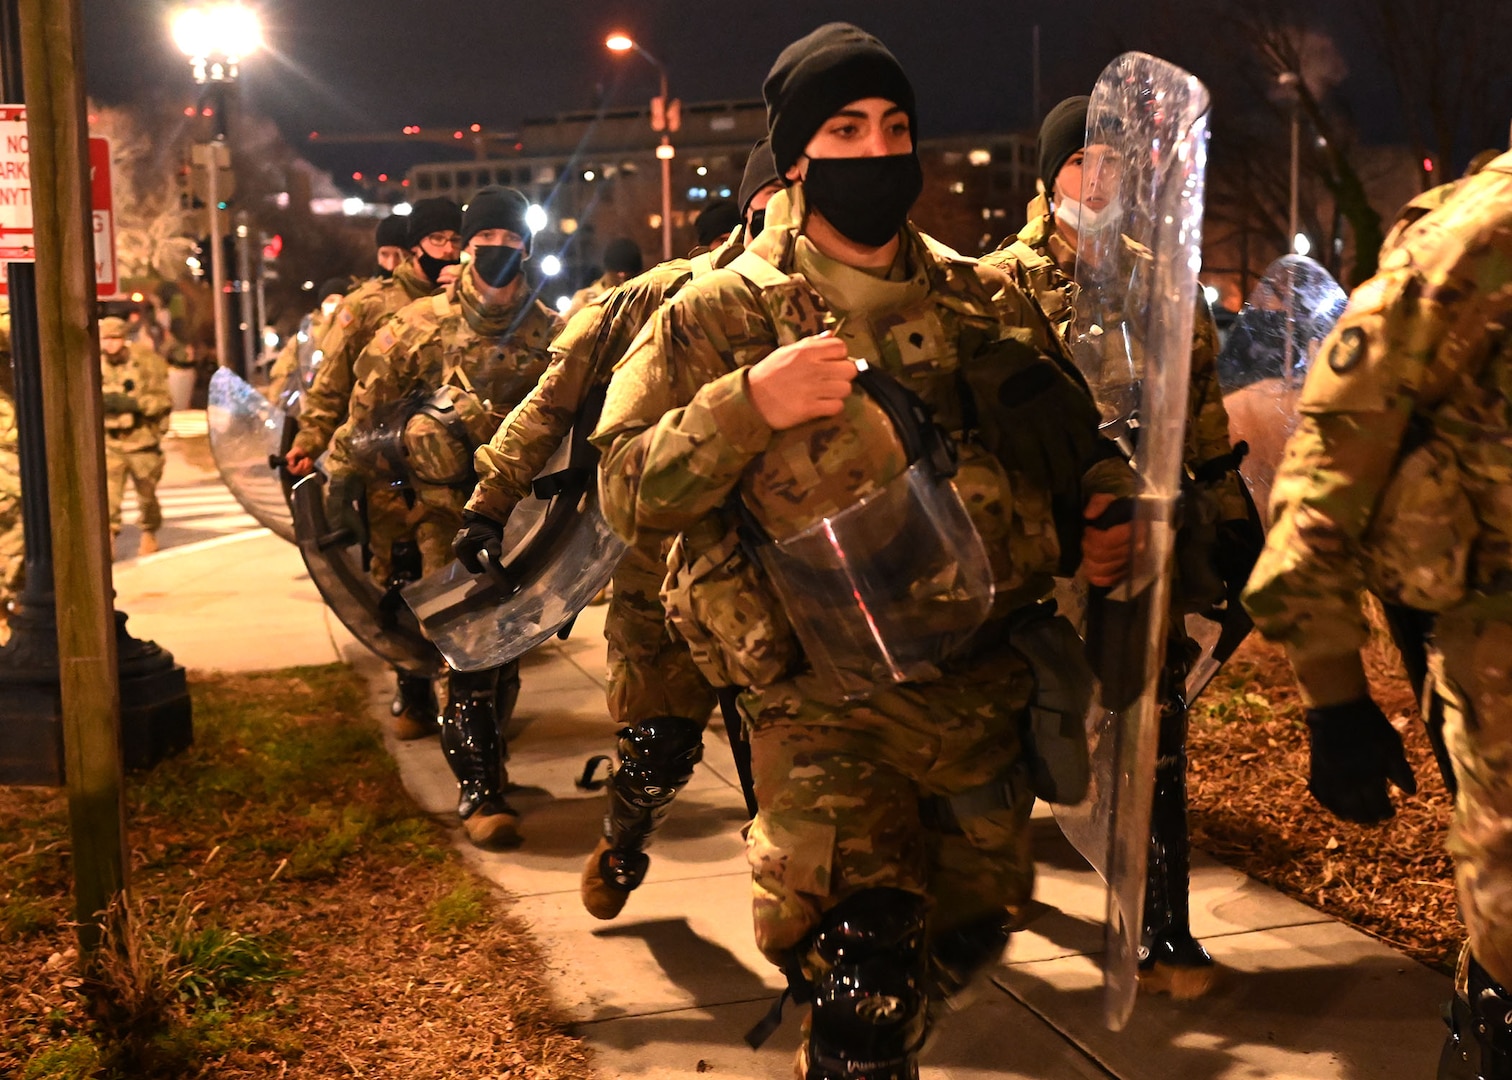 Spc. Joseph Lirette of the 160th Engineer Company, NHARNG, and fellow guardsmen march through the streets of Washington, D.C., on Jan. 20, 2021.